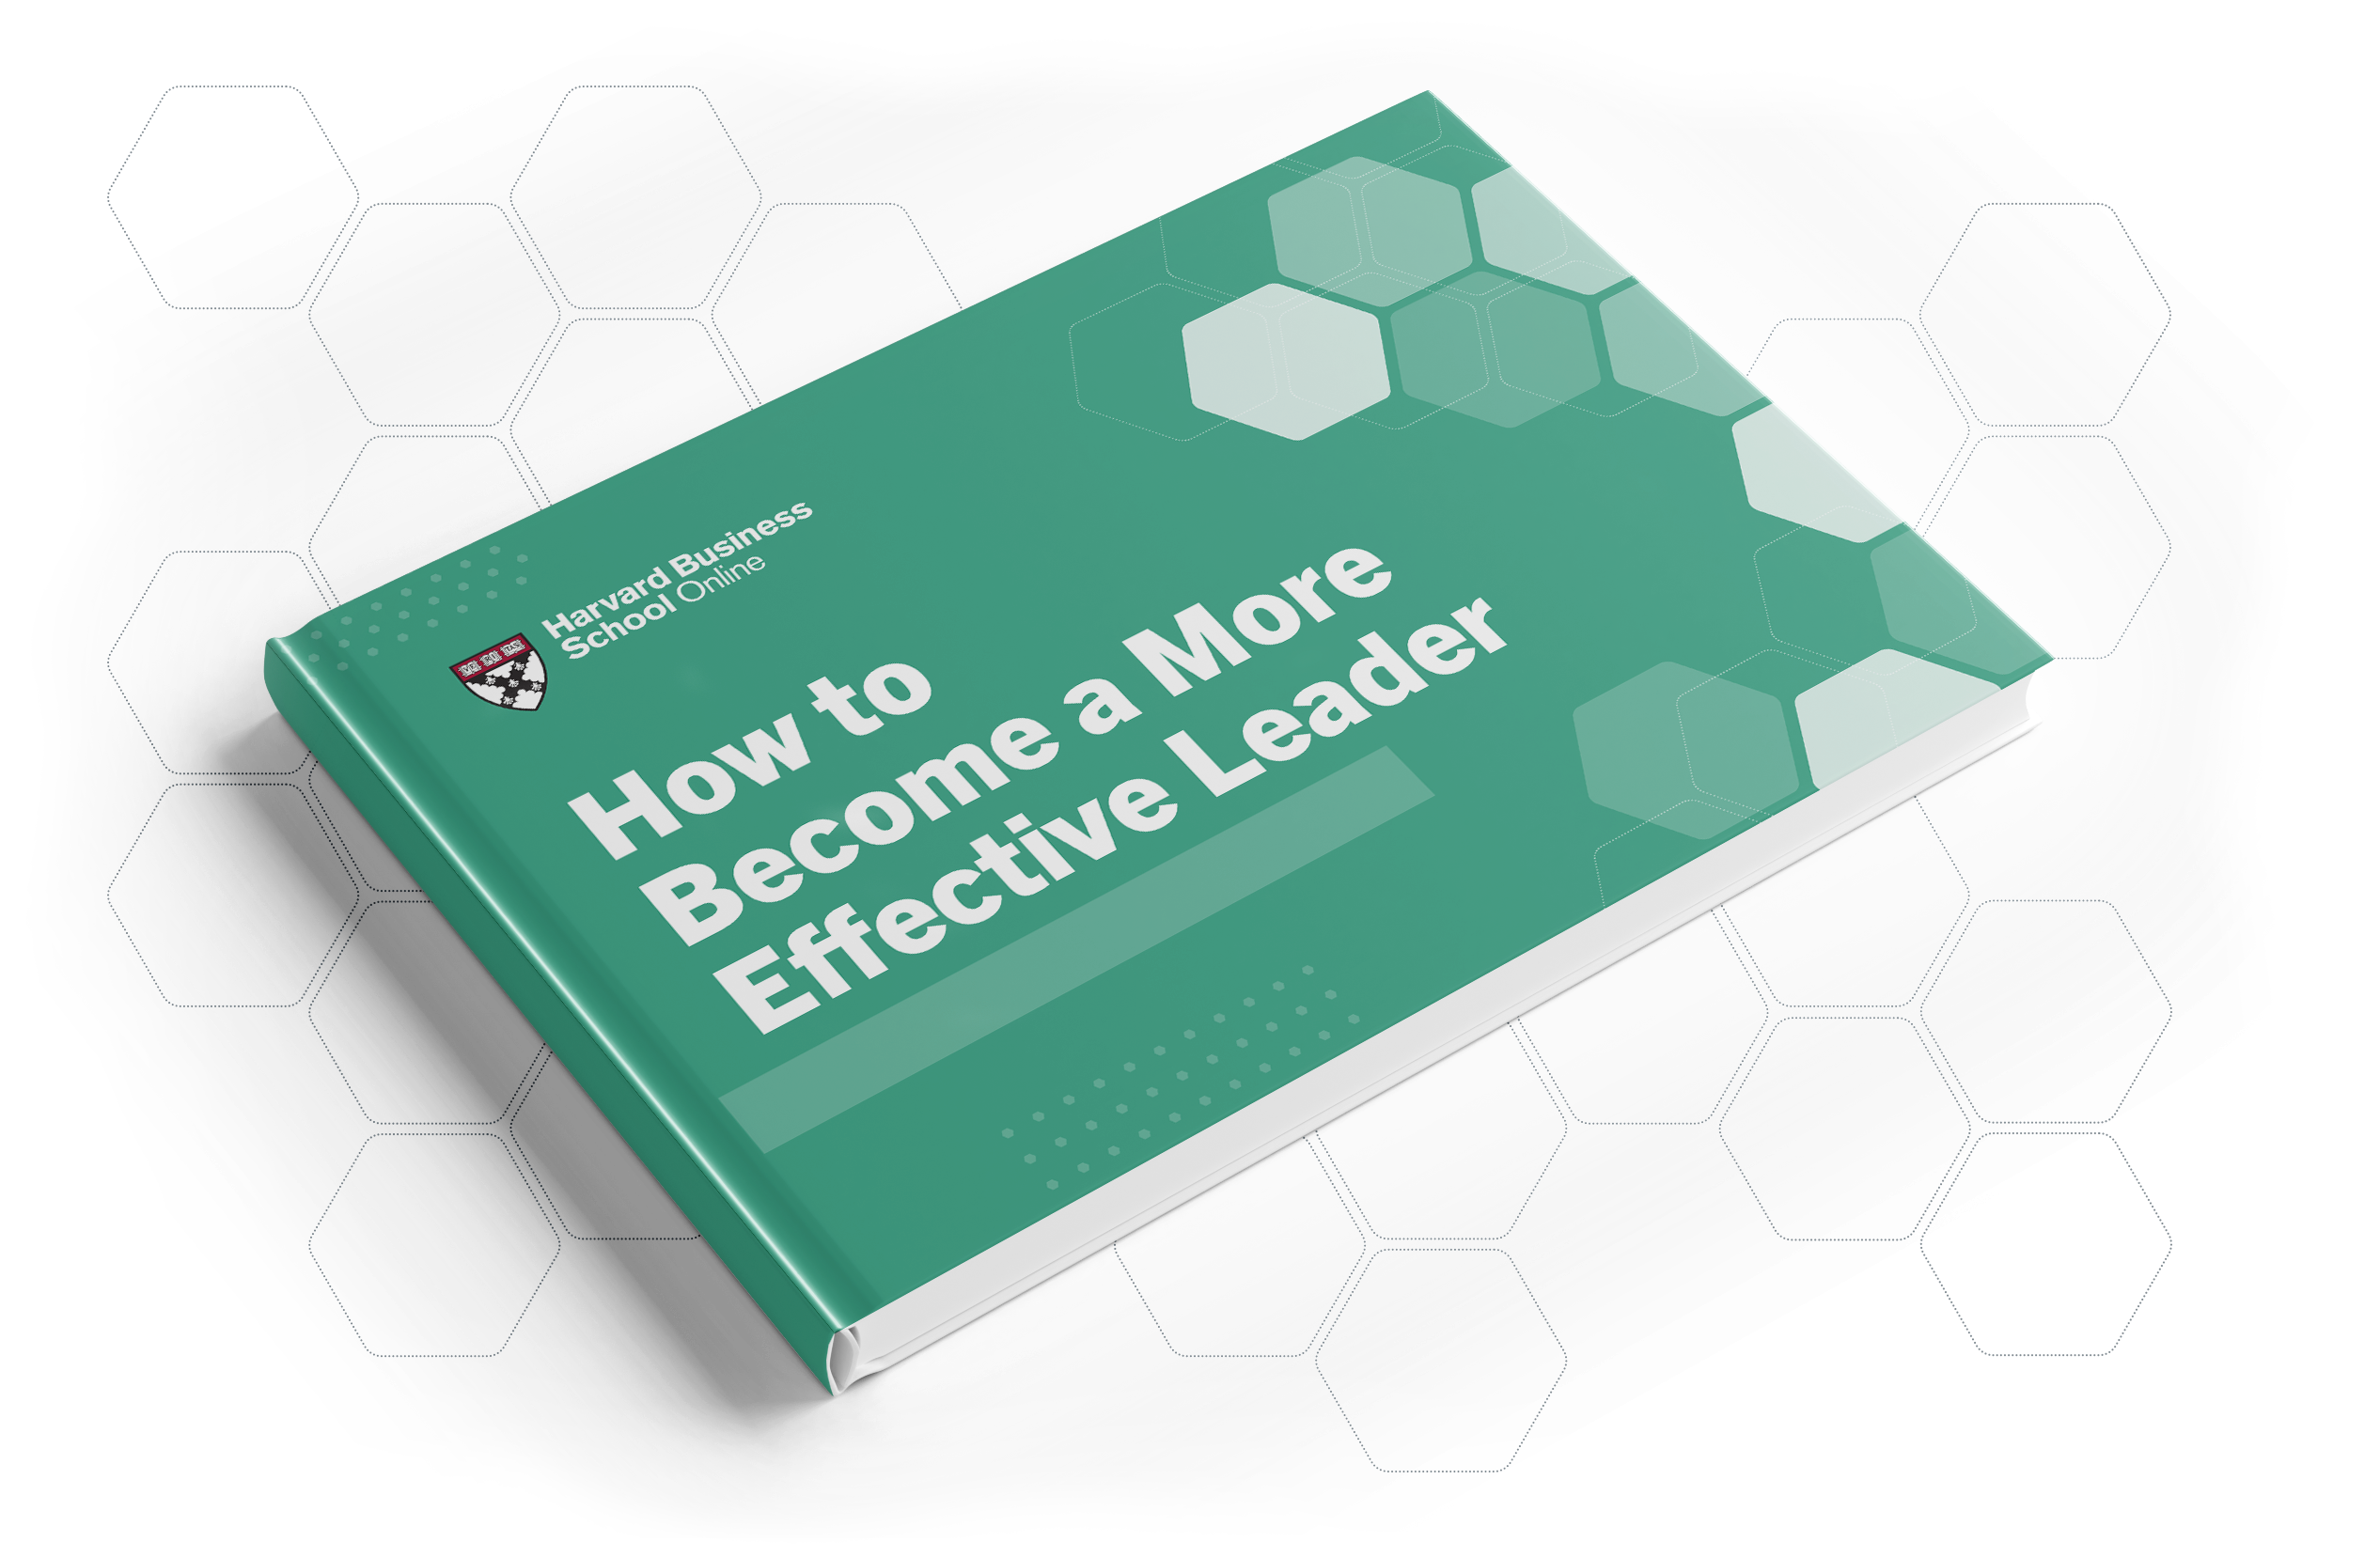 How to Become a More Effective Leader